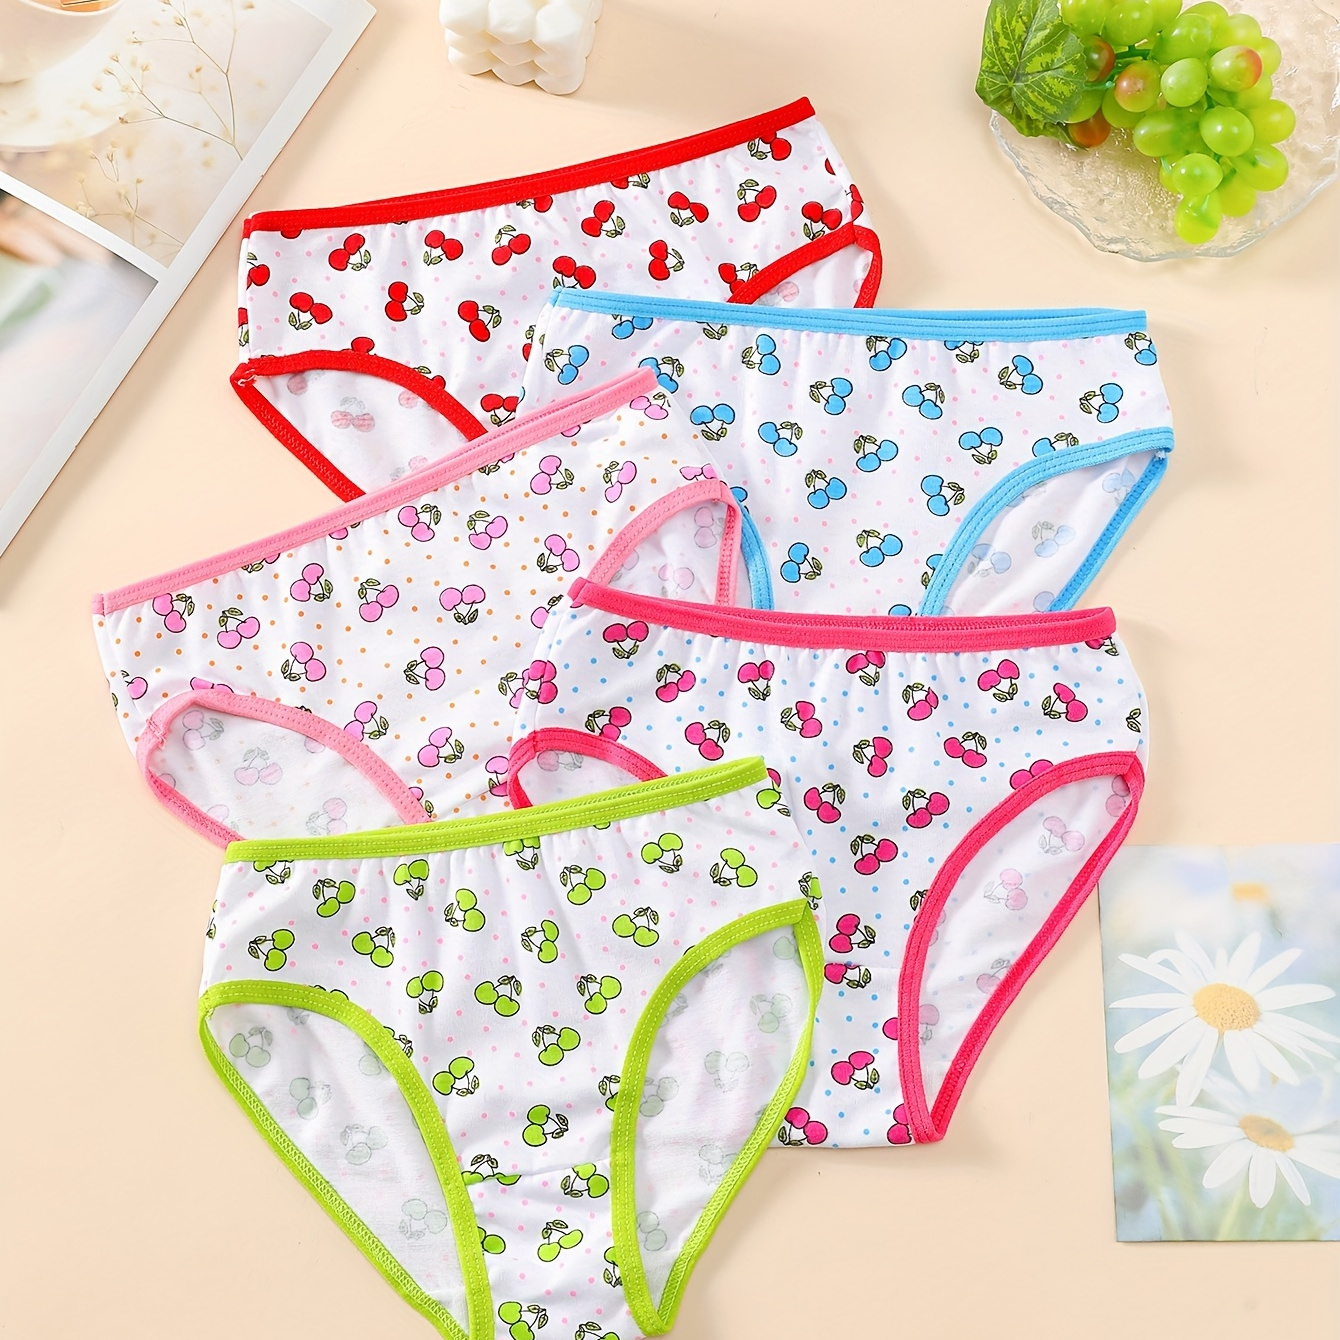 

5 Pcs Girls Underwear Class A Cotton Cute Mixed Color Cherry Pattern Breathable Boxers Soft Comfy Girls Panties